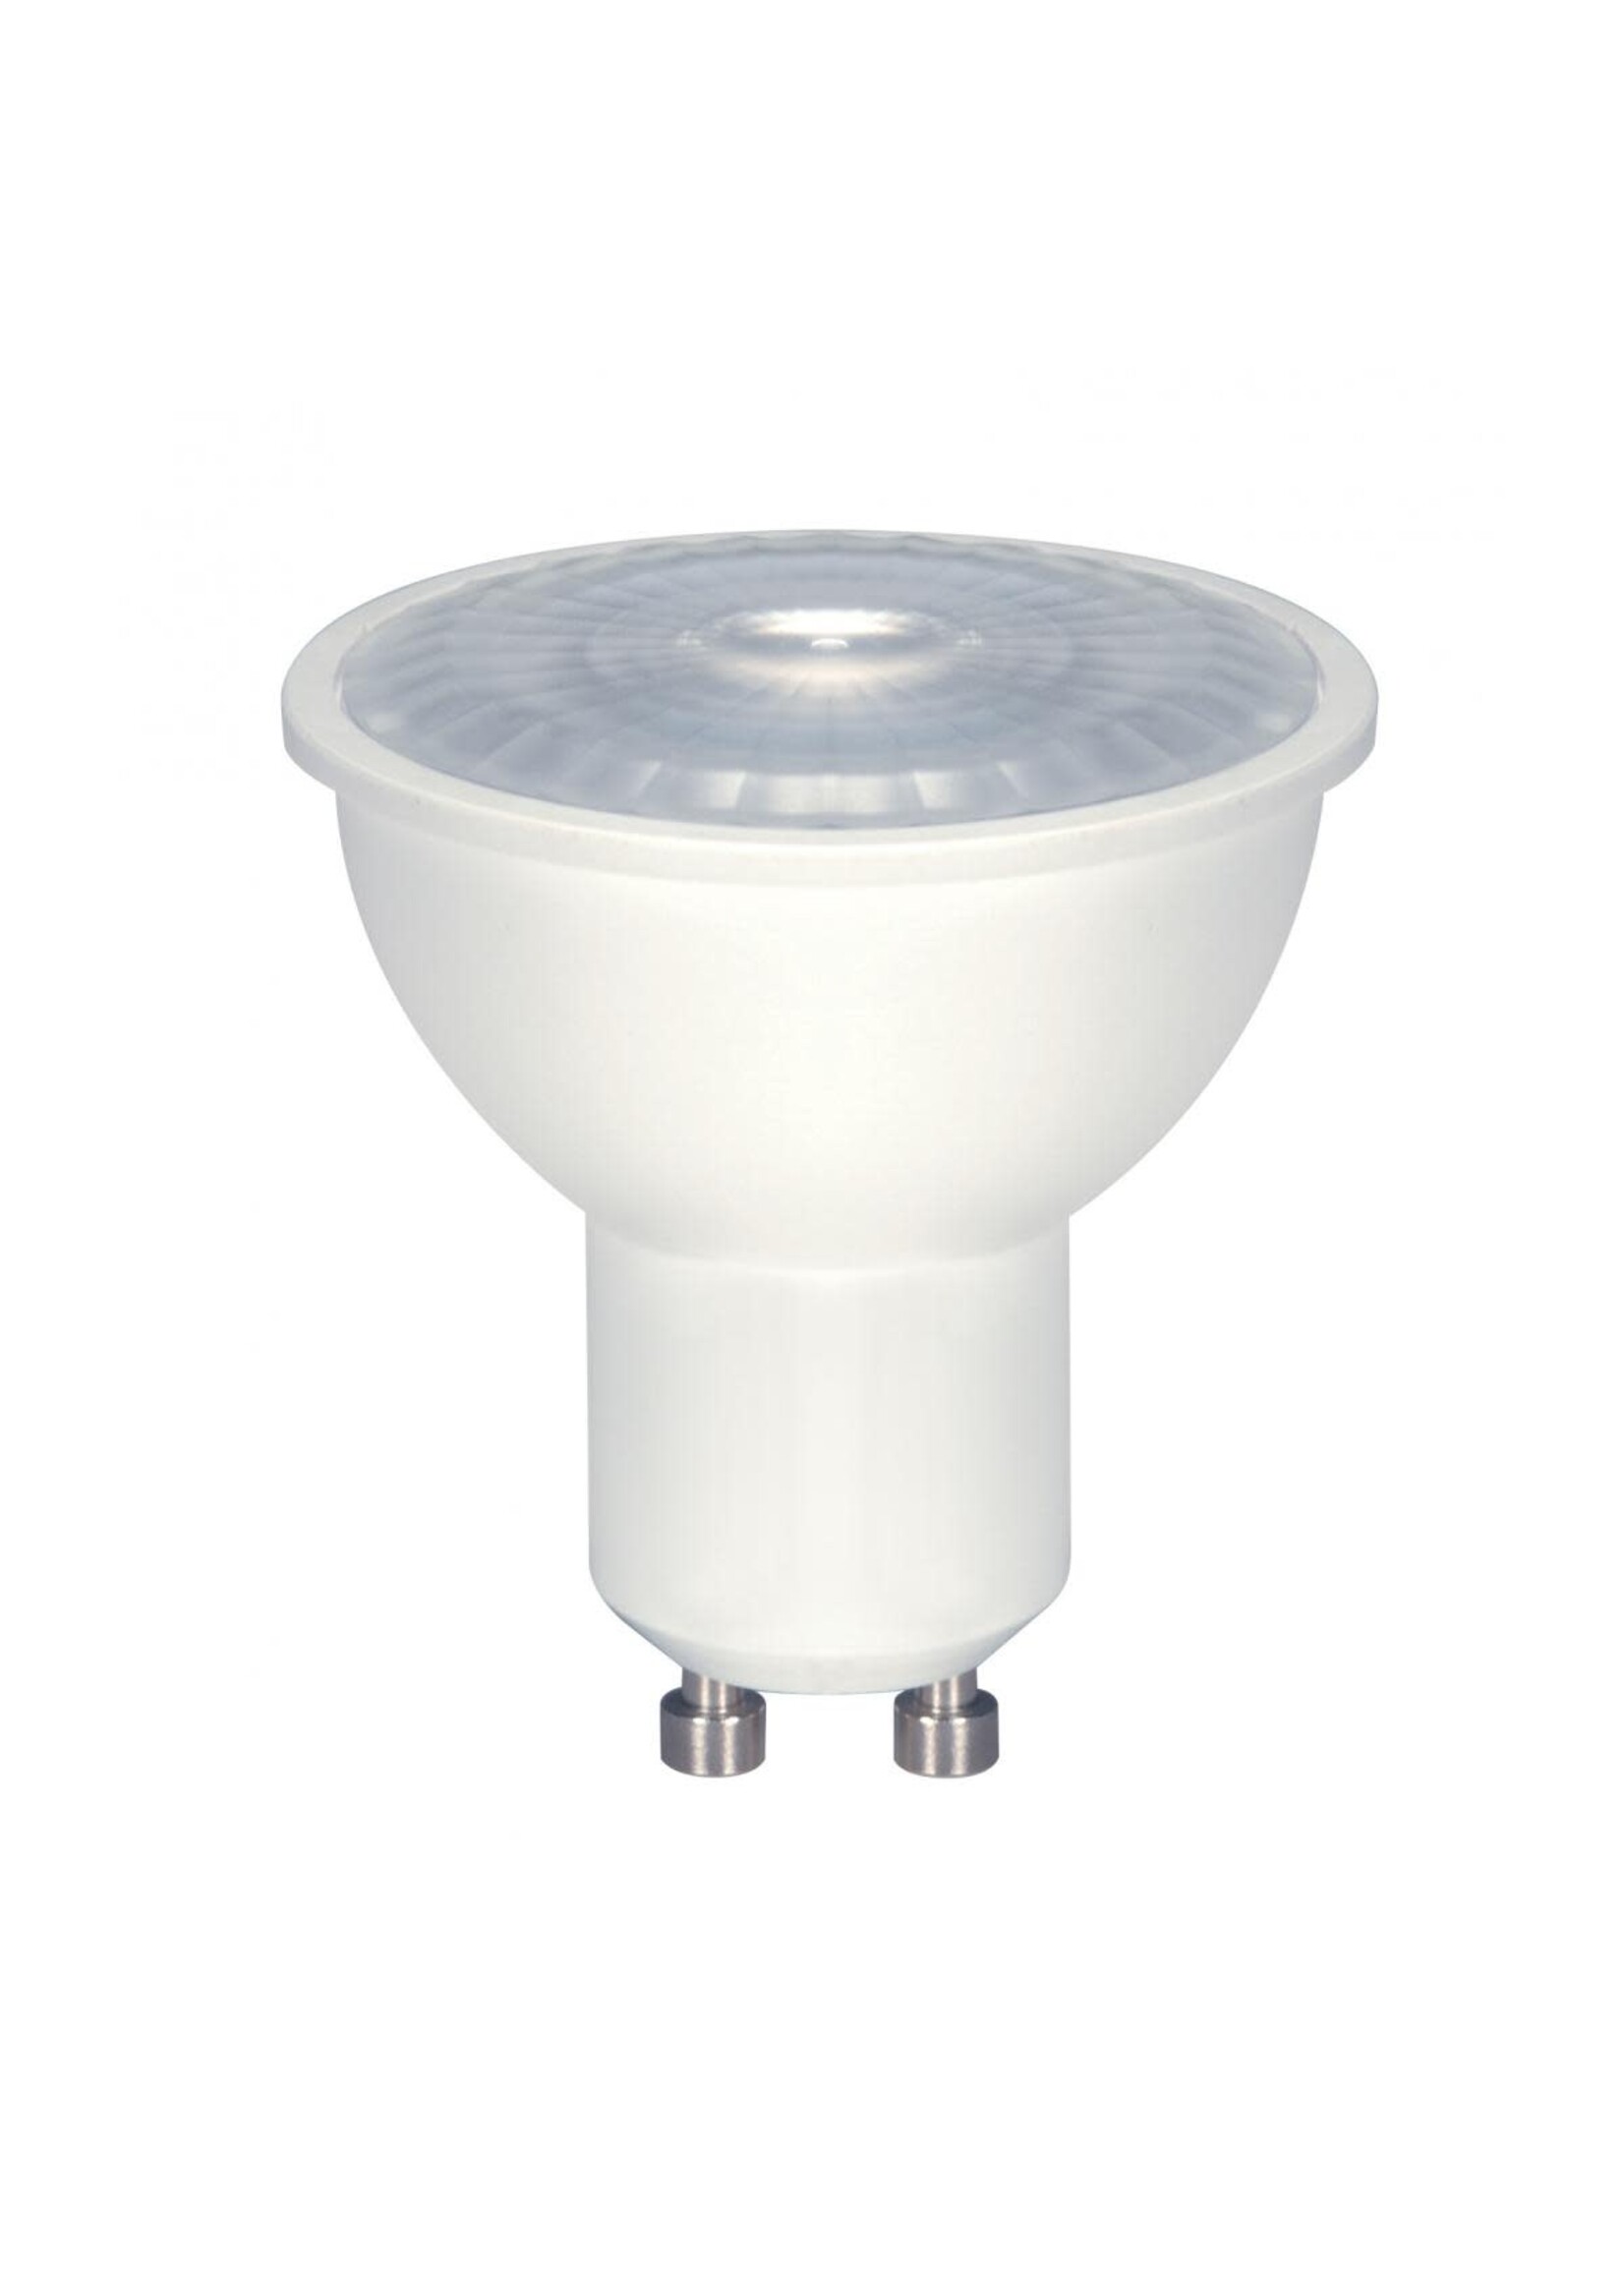 SATCO LED BULB 6.5W DIMMABLE  5000K  (S9385)